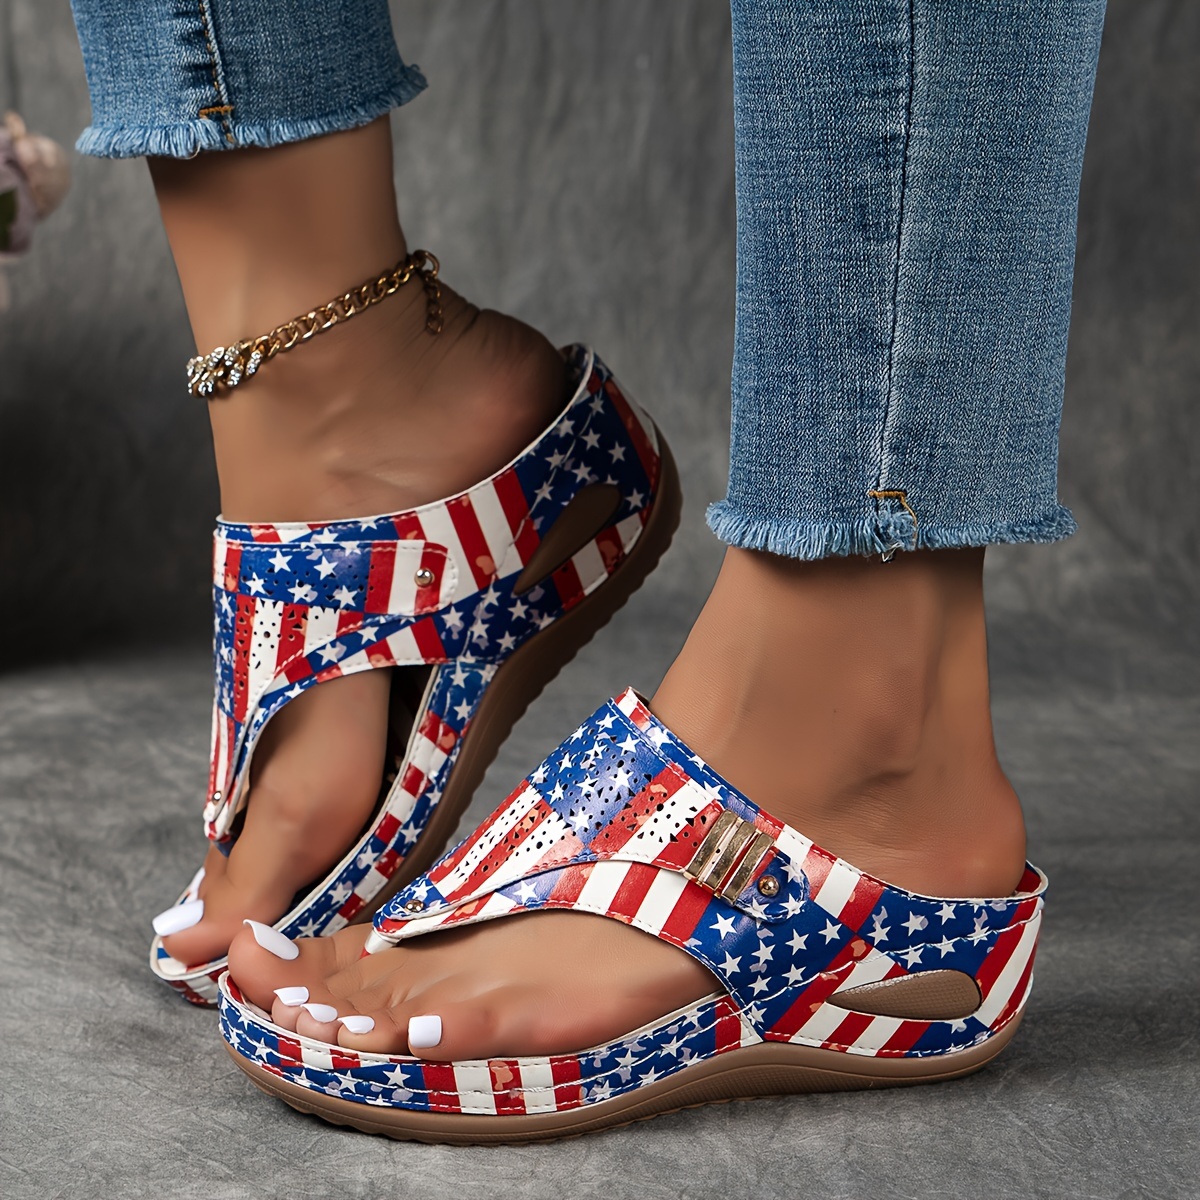 

Women's Wedge Flip Flops, American Flag Print, Comfortable Summer Sandals, Beach Slip-on Shoes With Heel Strap, Casual Footwear For Outdoor & Holiday Wear